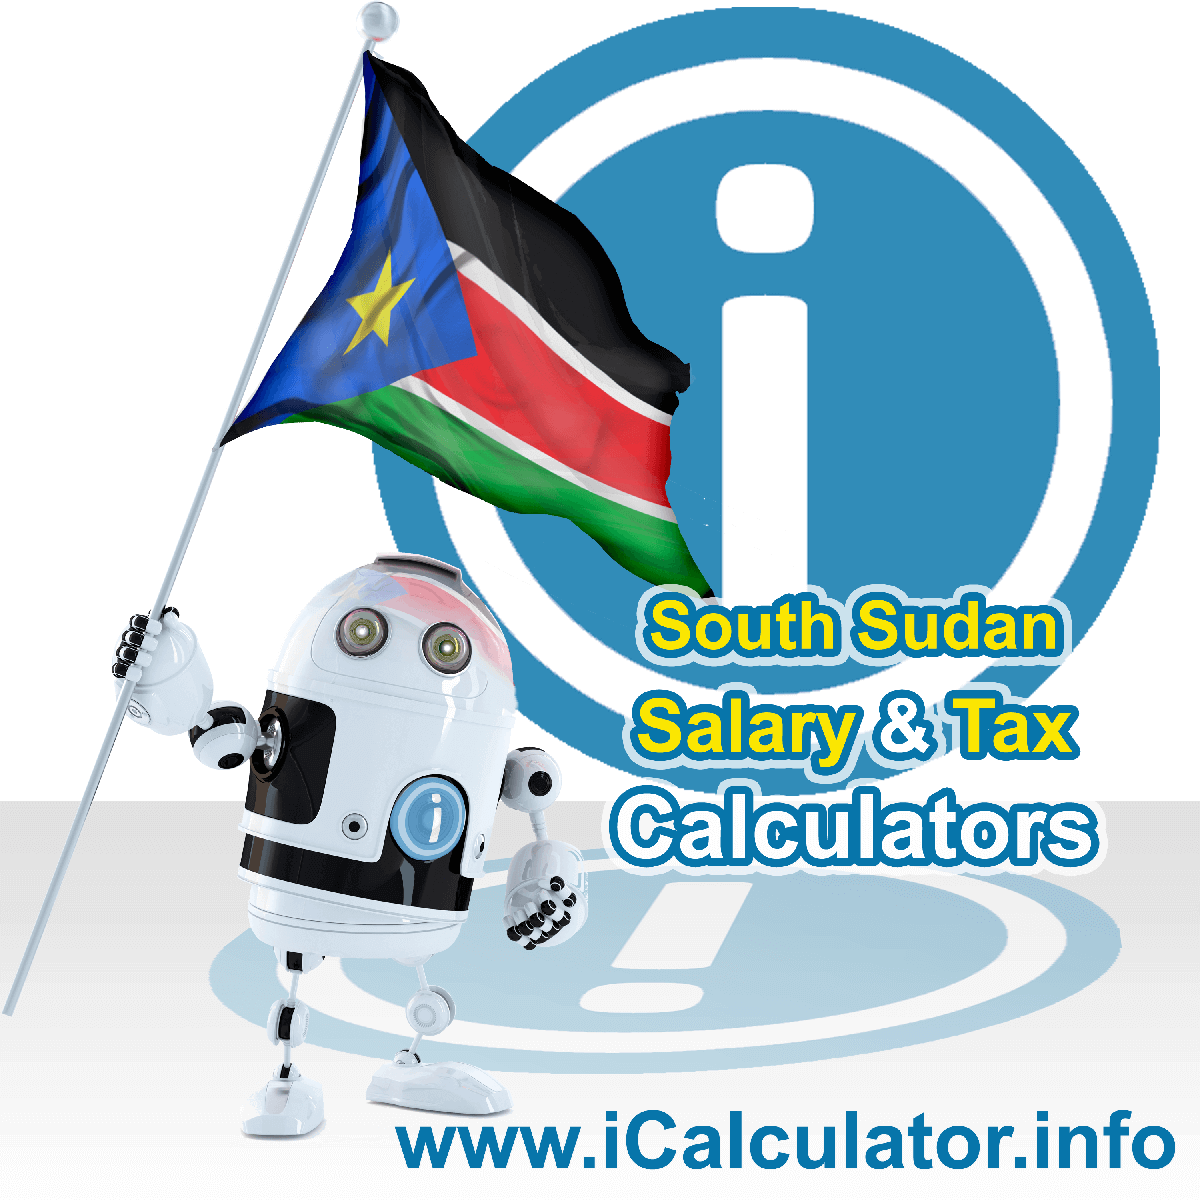 South Sudan Wage Calculator. This image shows the South Sudan flag and information relating to the tax formula for the South Sudan Tax Calculator